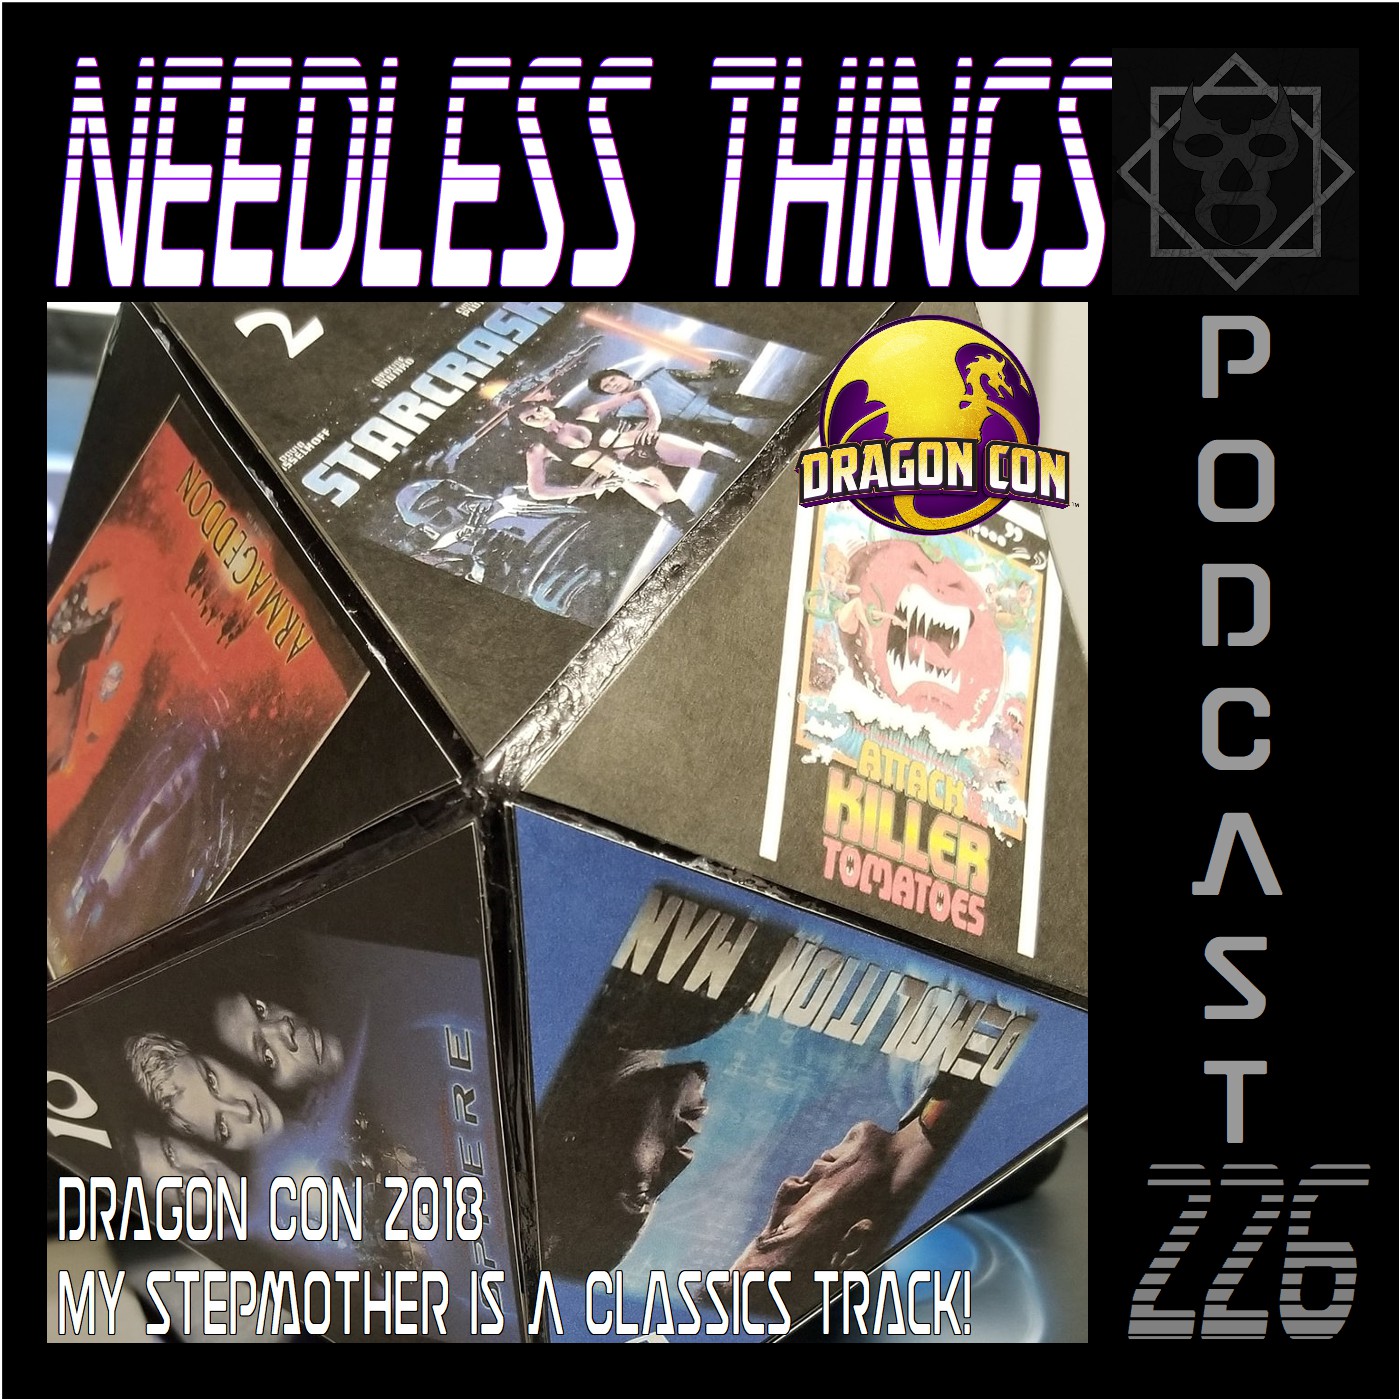 Needless Things Podcast 226 – Dragon Con 2018: My Stepmother Is A Classics Track!